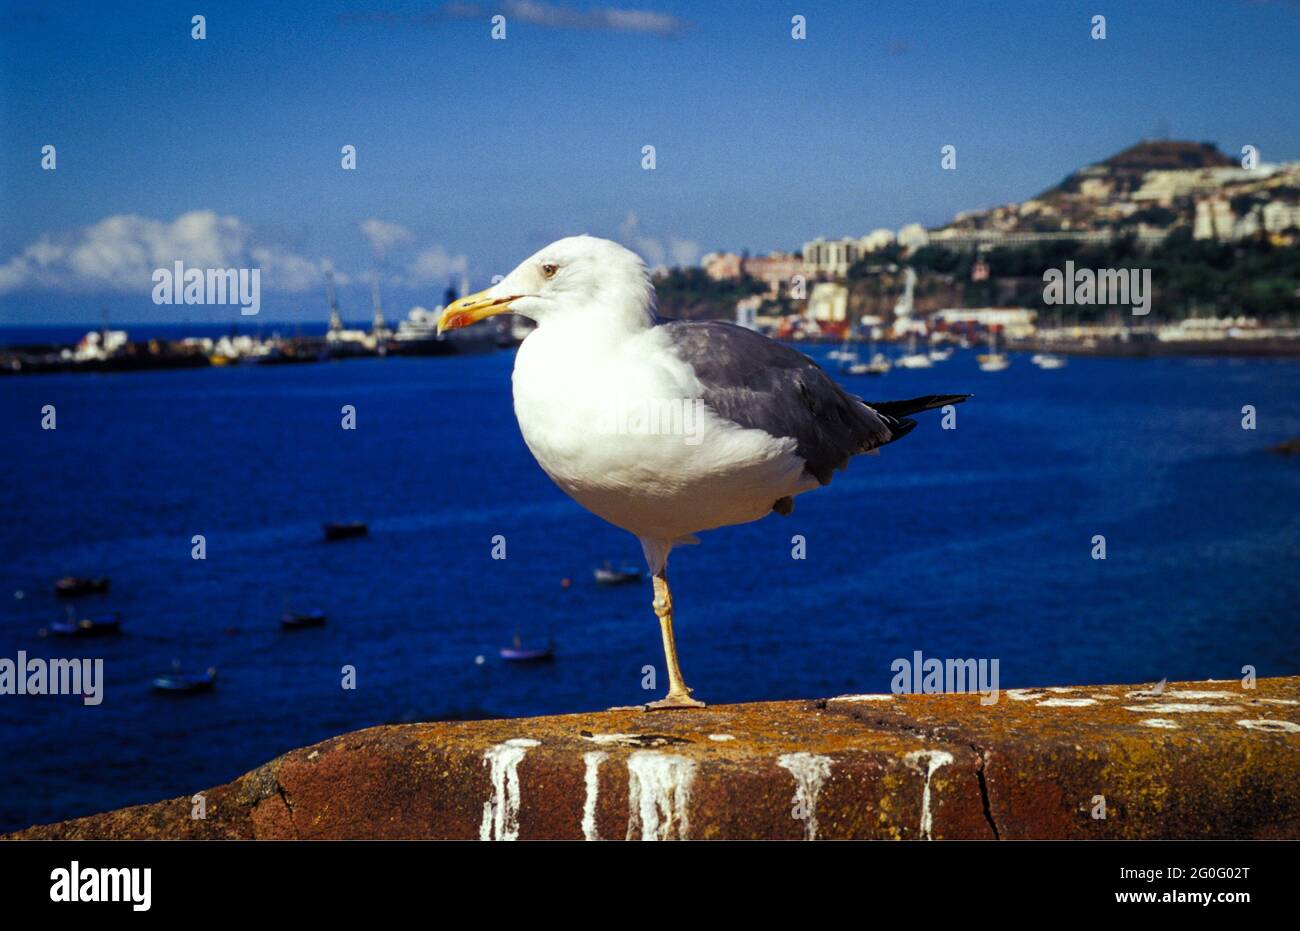 Vogelperspektive: Eine Möwe beobachtet gelassen von der Mauer der Festung Sao Tiago das Treiben im Hafen von Funchal. - A birds' view of the harbour. A seagull sitting relaxed on the wall of the fortress of Sao Tiago watches the coming and going in the harbour of Funchal. Stock Photo